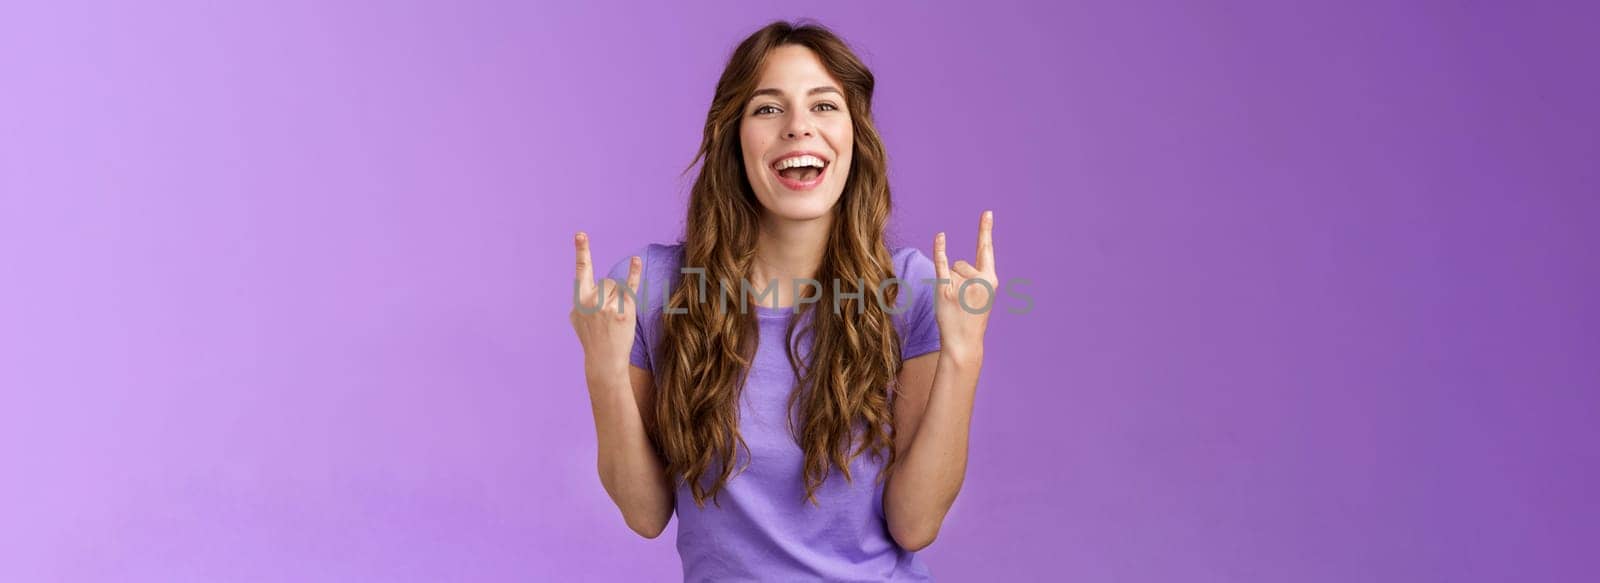 This summer holidays rock. Happy enthusiastic cheerful girl having fun enjoy awesome party weekends smiling broadly say yeah joyful make heavy-metal sign stand purple background amused.